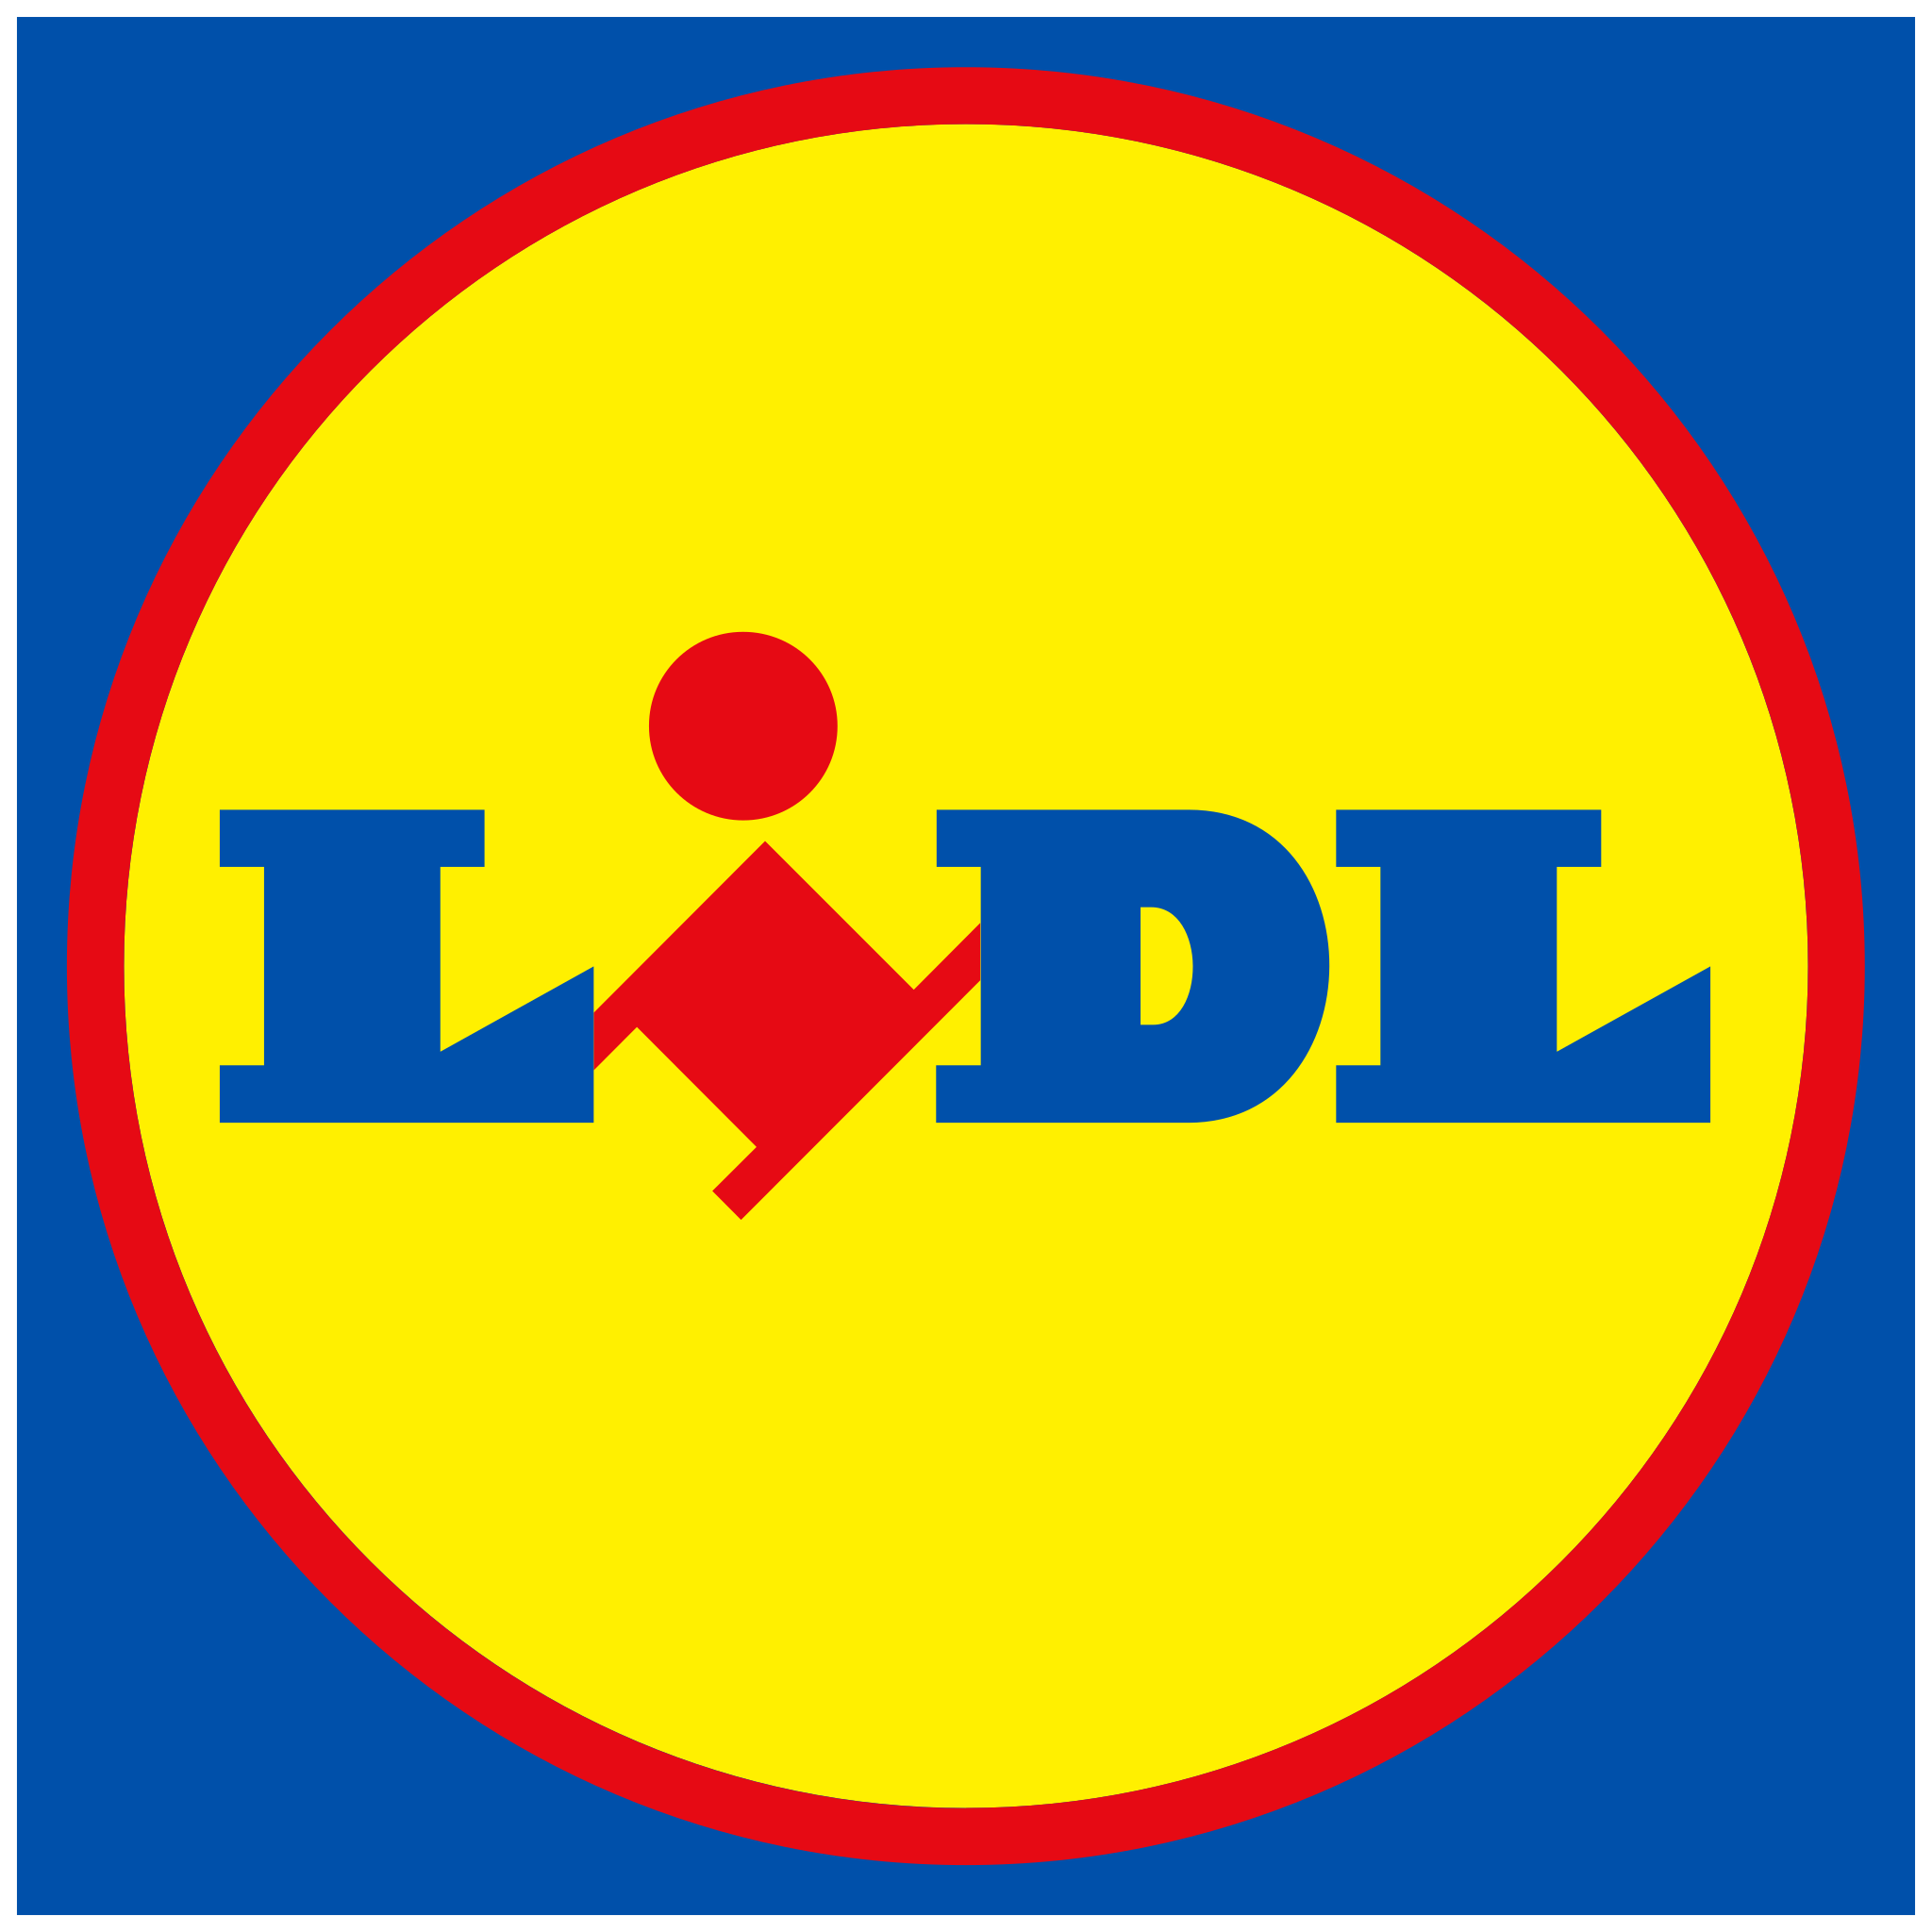 Get 20% Back at Lidl With This Amex Offer